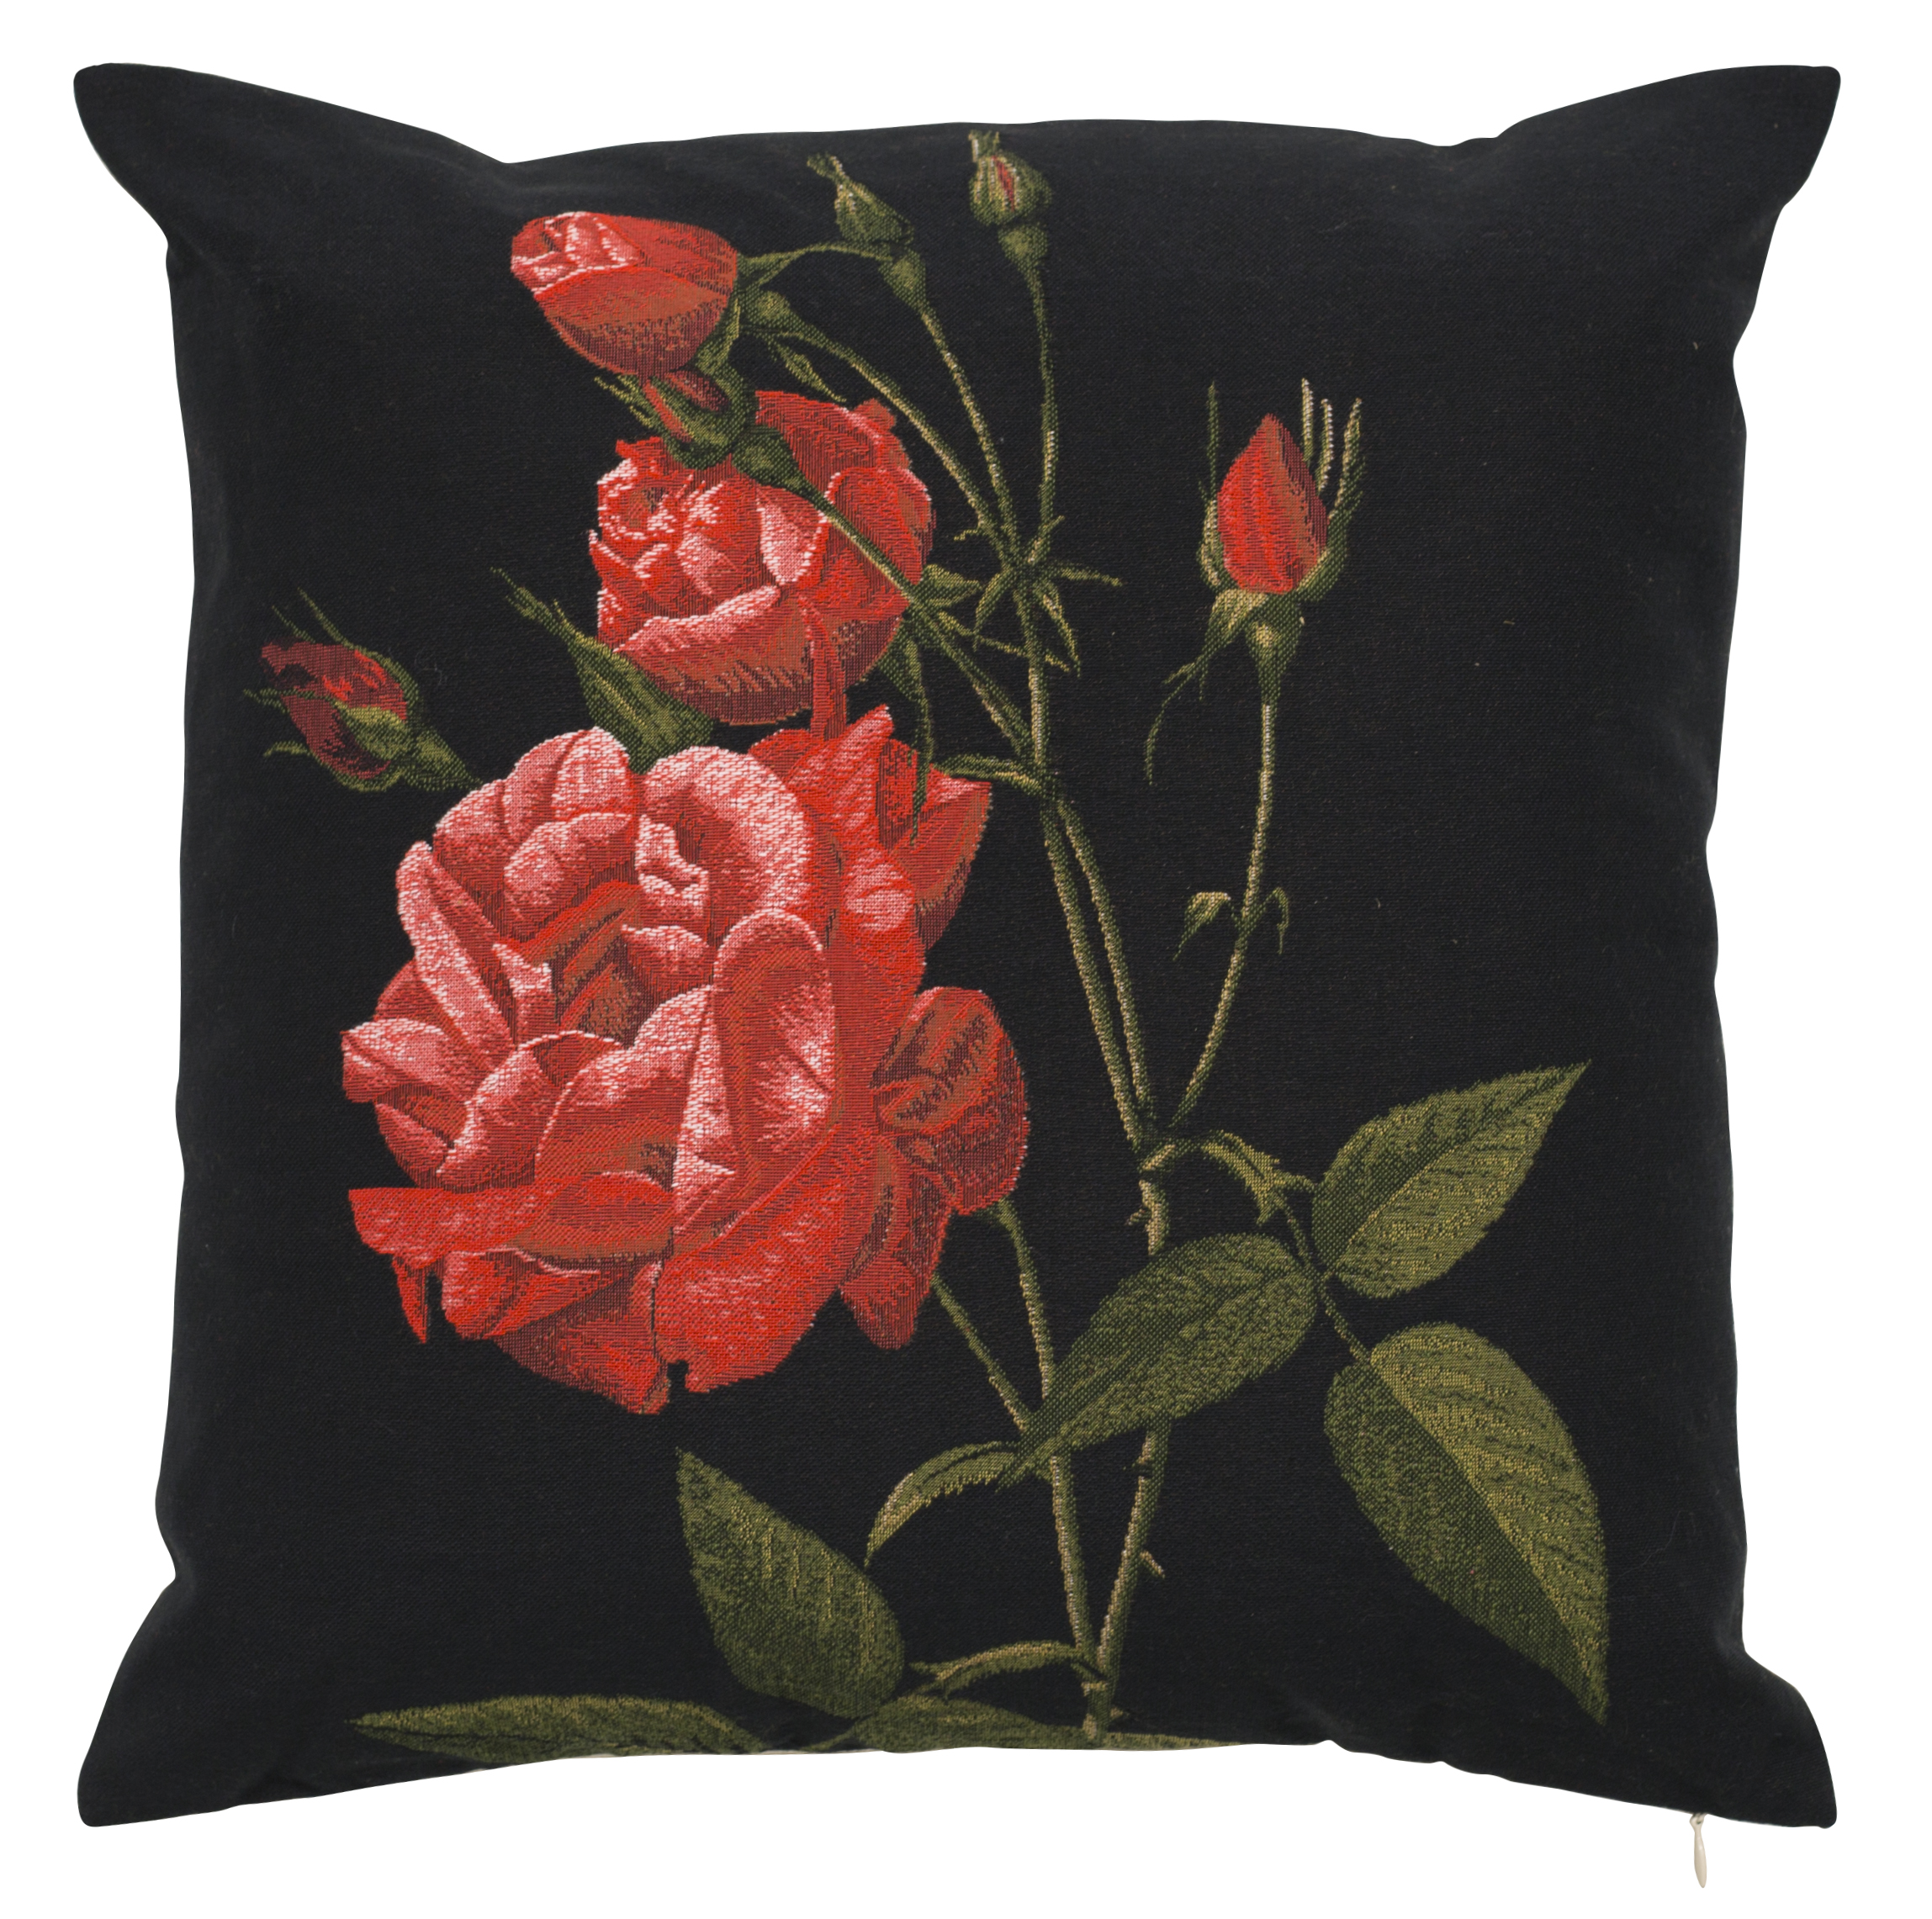 Pillow - Jane - Red in Black Background